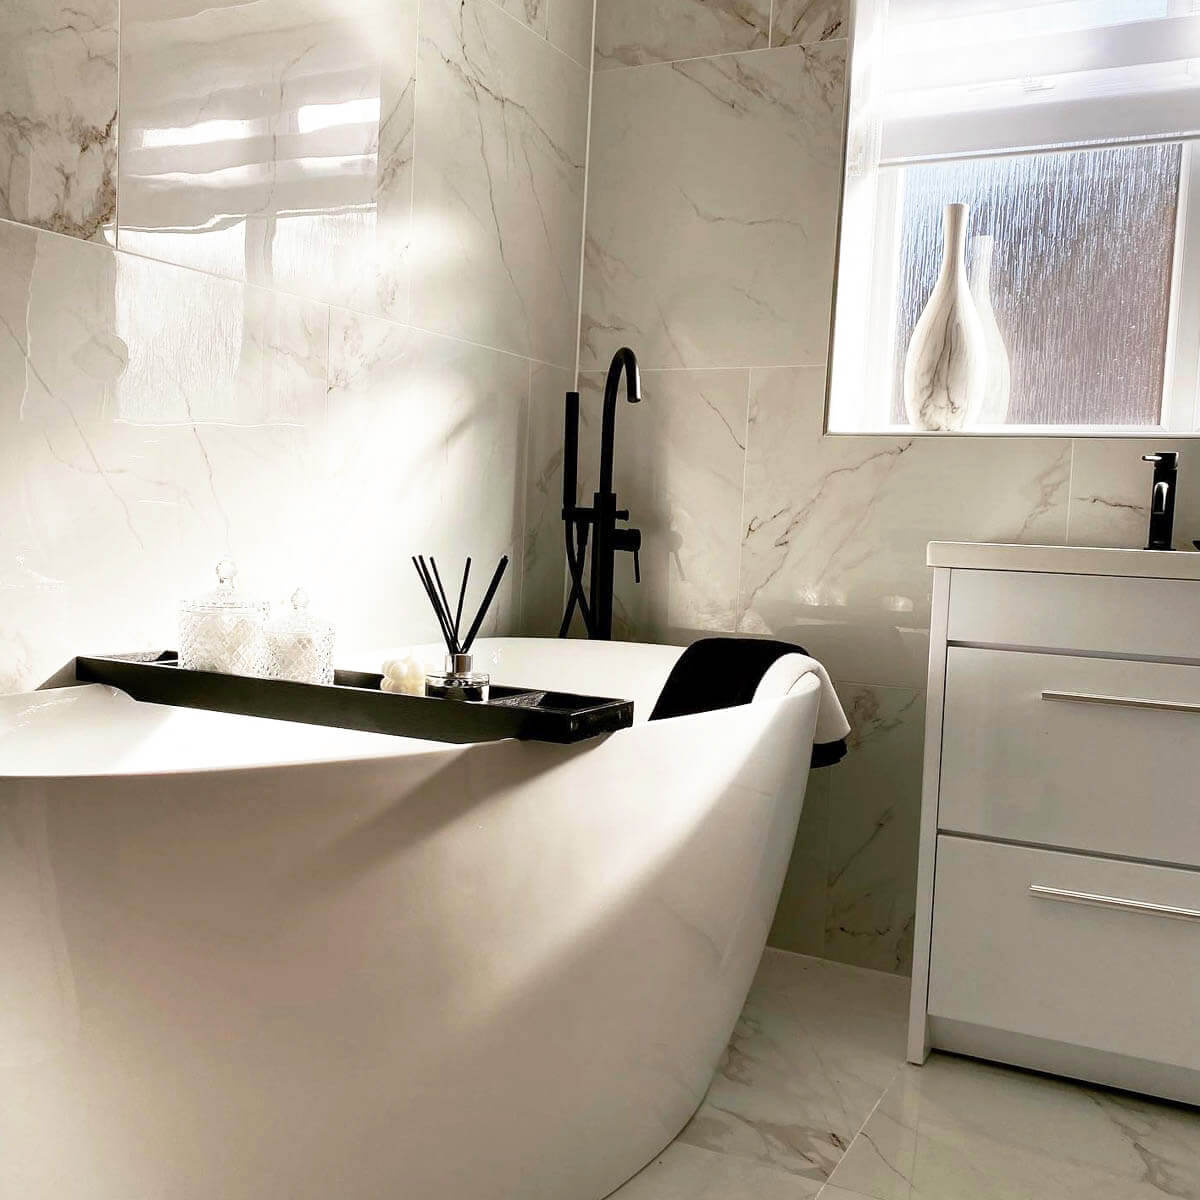 marble effect porcelain tiles in a bathroom with free standing bath